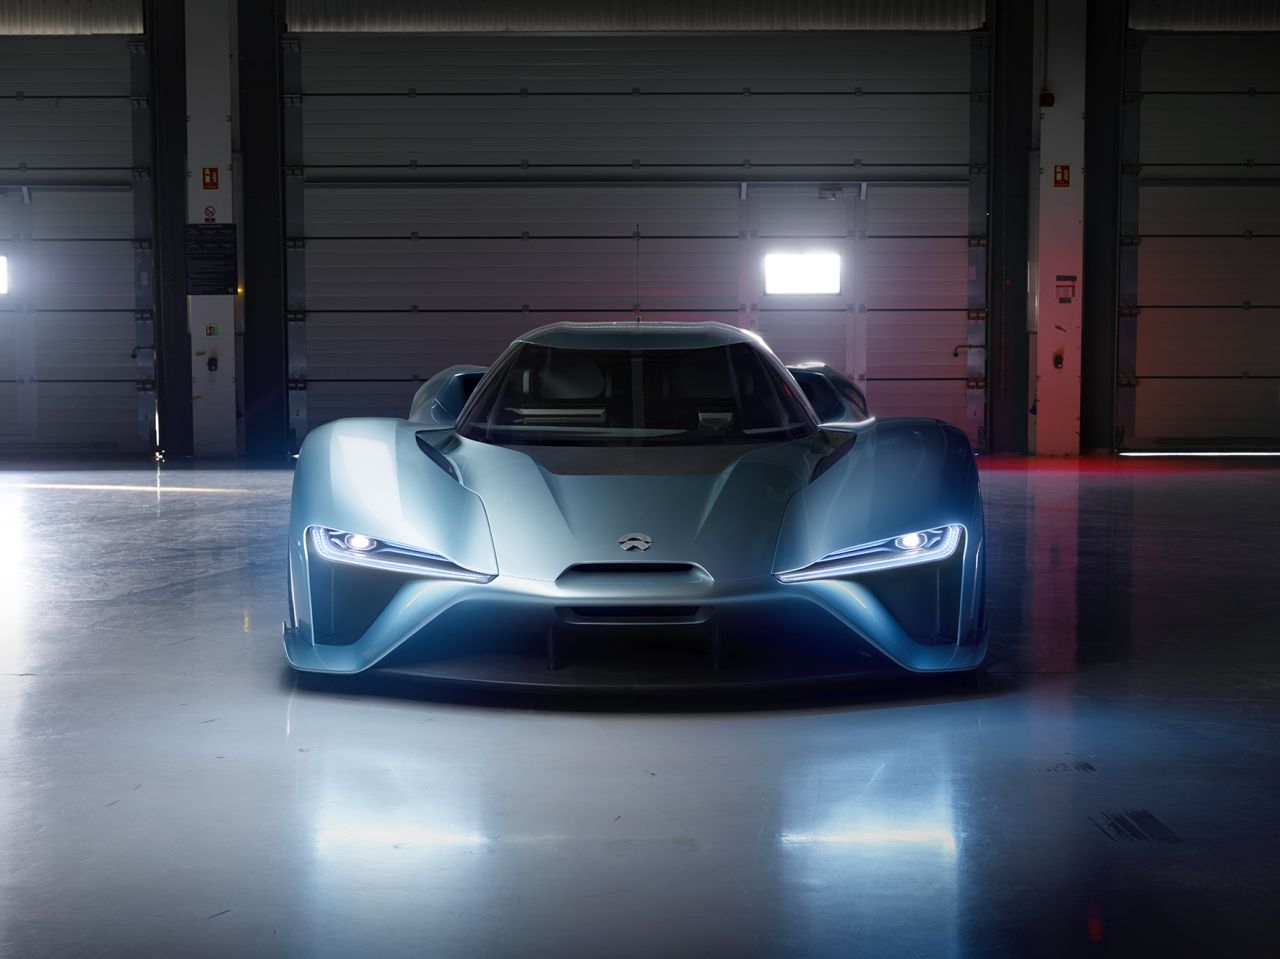 The Chinese electric car maker and <a href="http://www.nio.io/formulae" target="_blank" target="_blank">Formula E team </a>set a new electric car lap record at the Nurburgring with its <a href="http://www.nio.io/home" target="_blank" target="_blank">NIO EP9</a> hypercar in November and is set to launch a mass market car in 2017. The EV will take some of its design cues from the NIO EP9, the company says, but it will only be available in China initially.